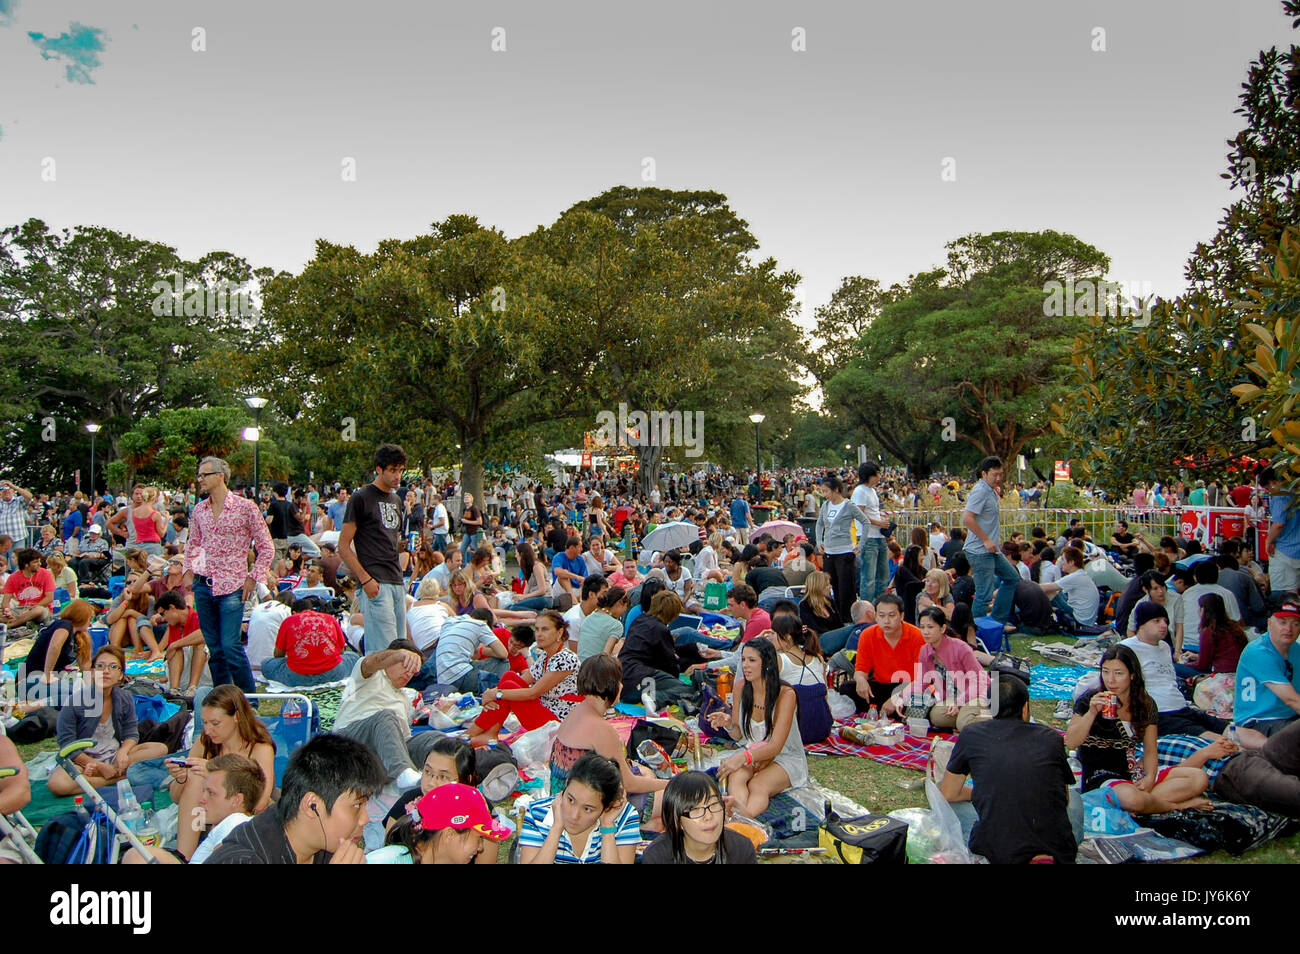 A large crowd waits in anticipation for the new years eve fireworks display in Sydney, Australia Stock Photo